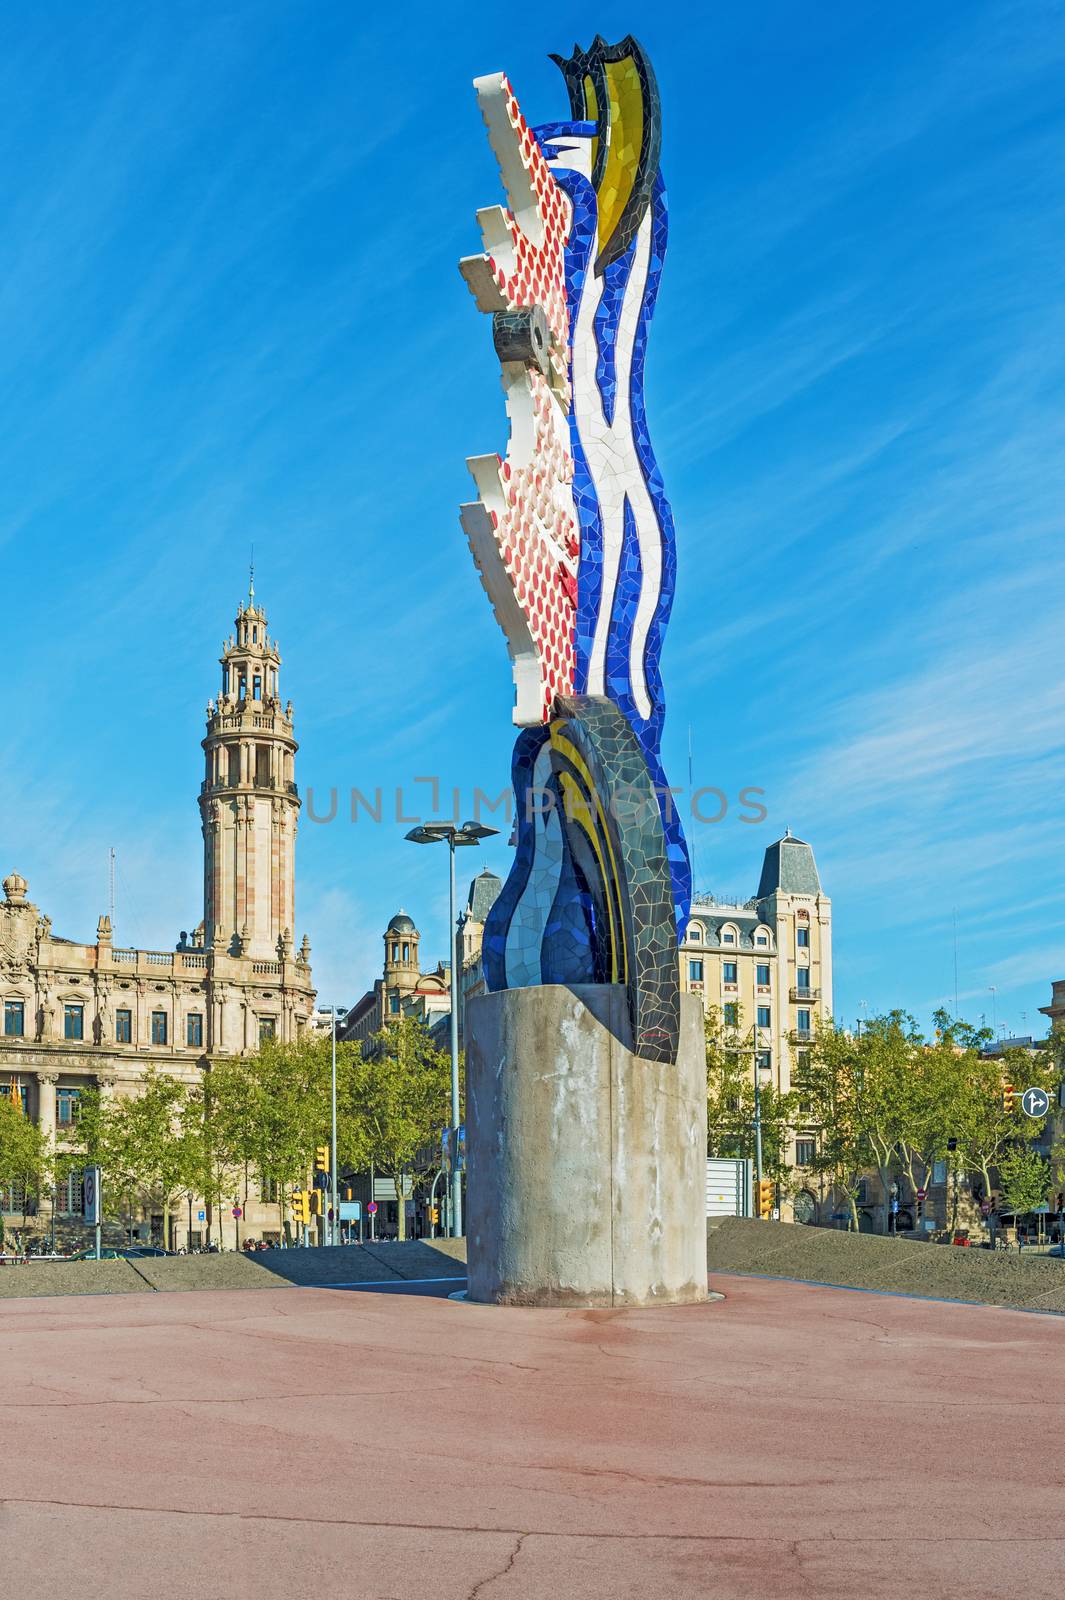 Barcelona, Spain - April 6, 2014:  View at The Barcelona Head sculpture (also known as Barcelona Face) was designed by American Pop Artist Roy Lichtenstein for the 1992 Olympic Games